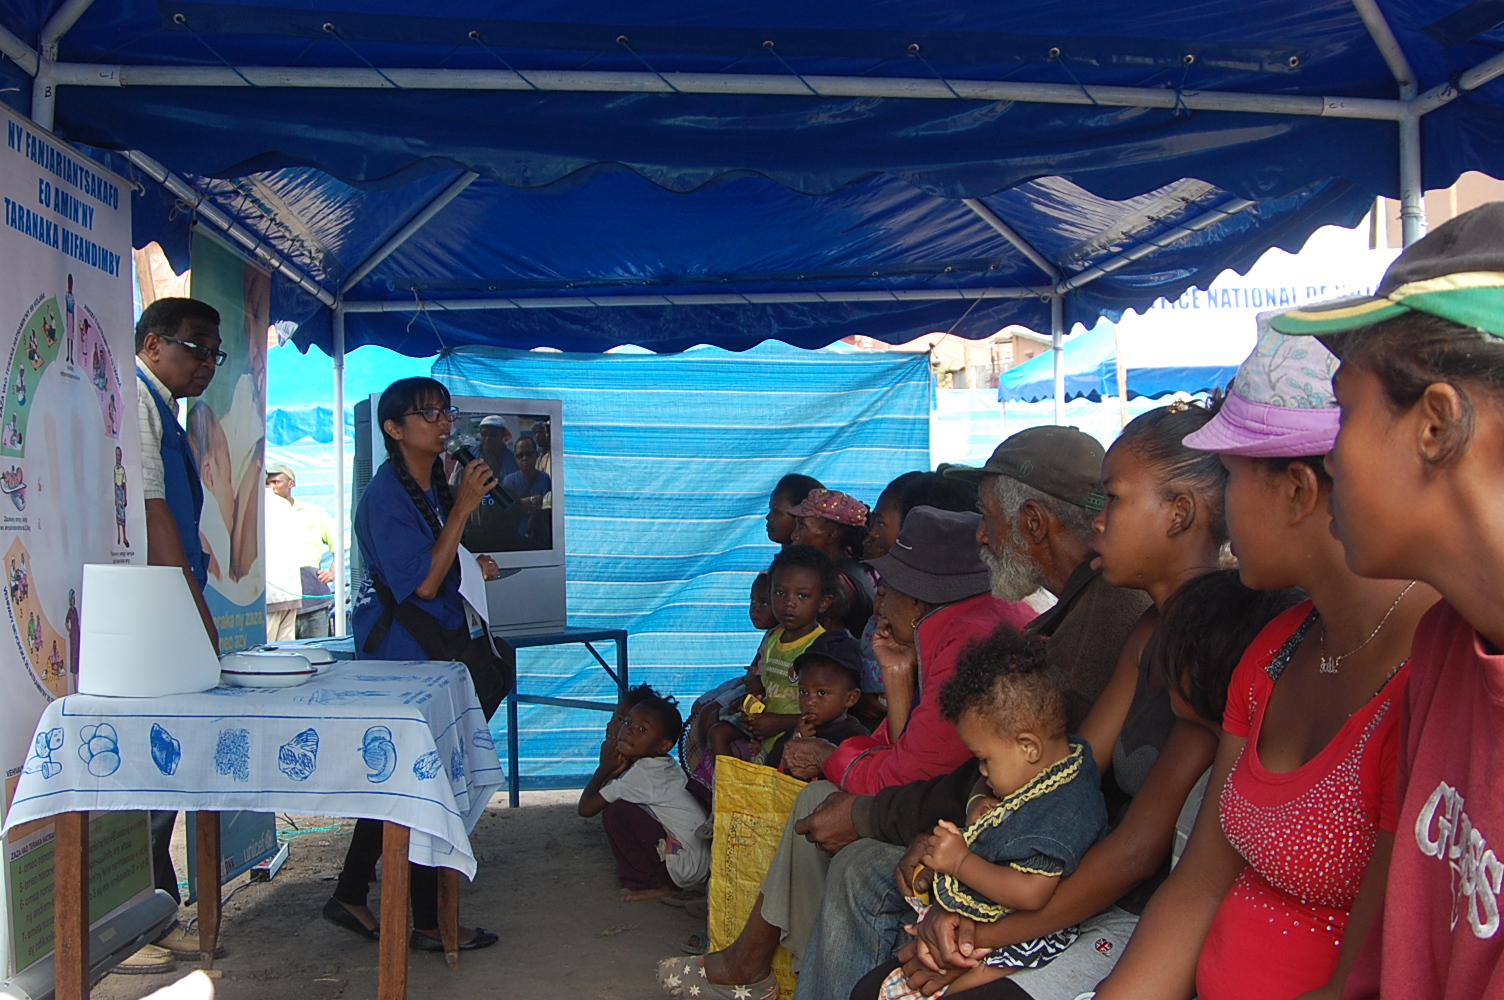 The National Nutrition Office reinforces community-level actions through a mass mobilization programme in disadvantaged districts of Antananarivo